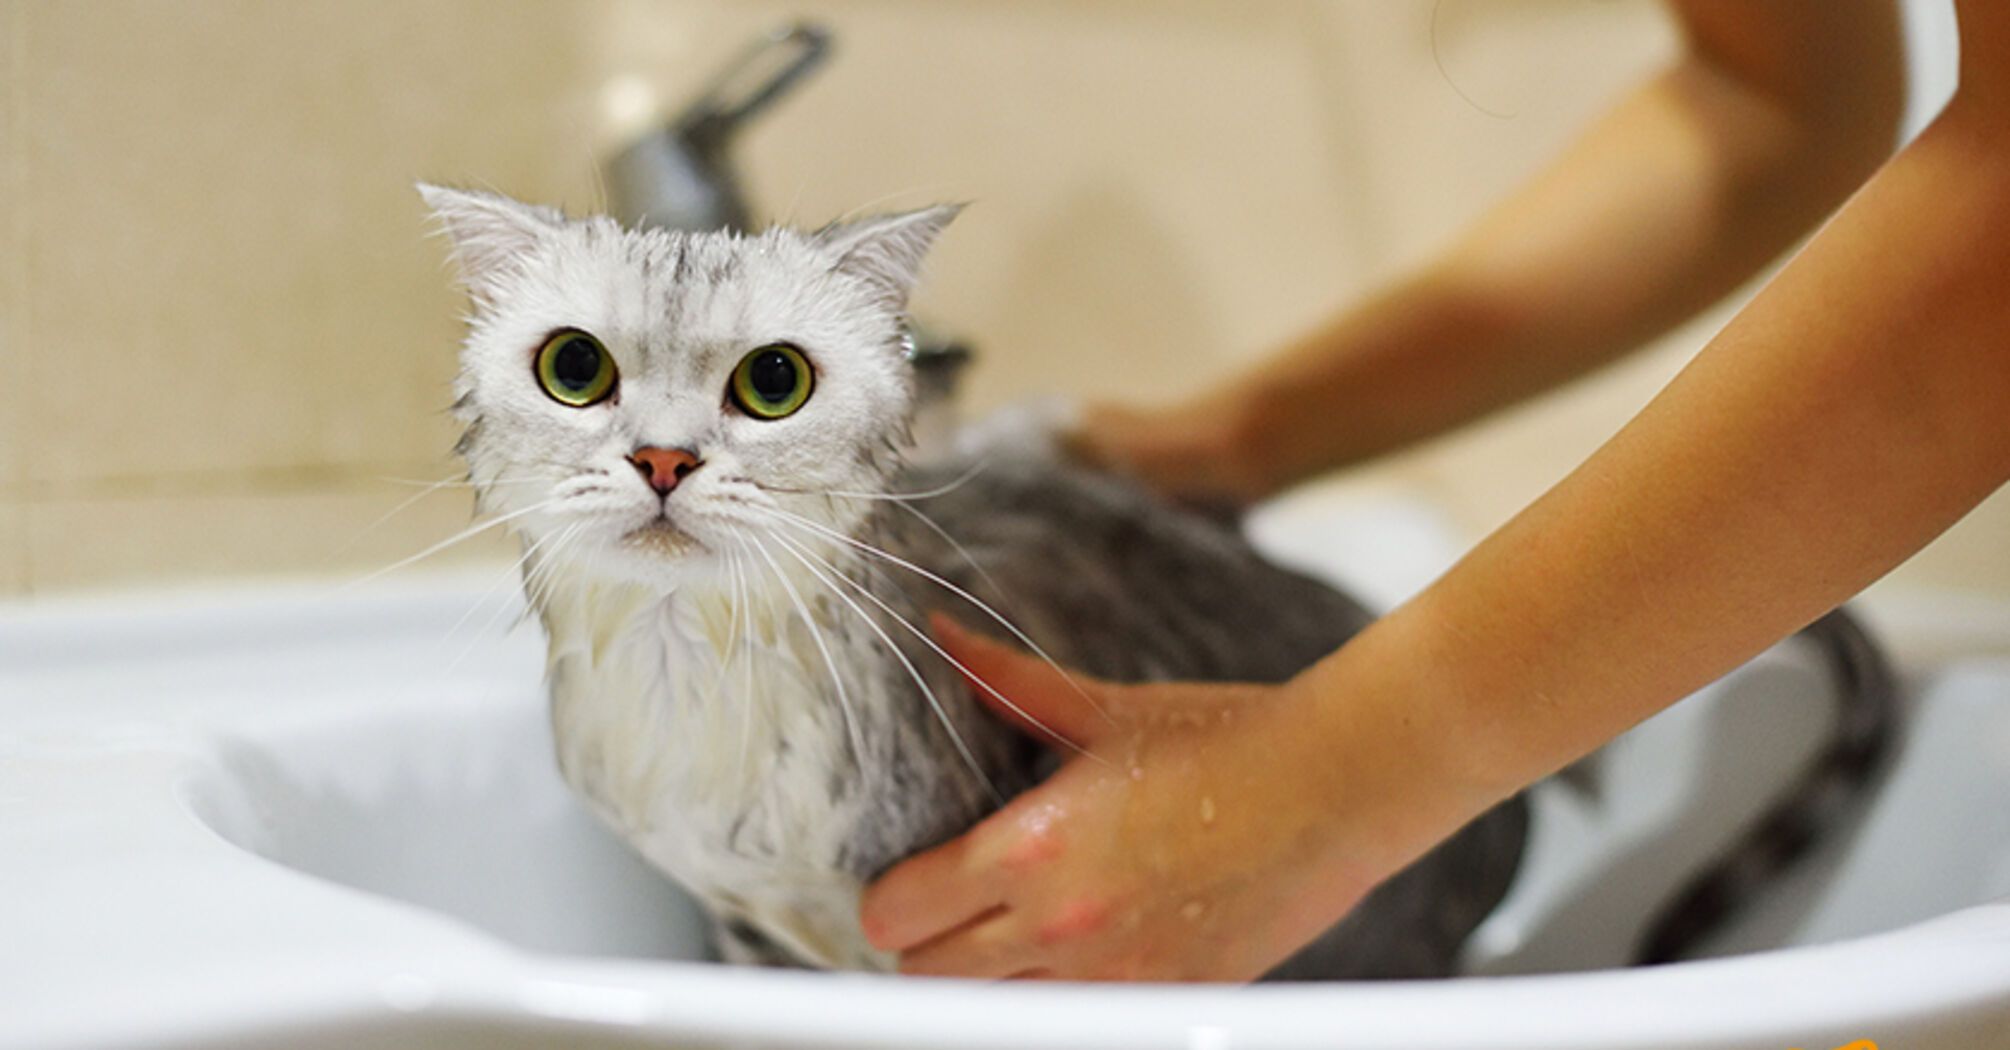 How to bathe a cat who is afraid of water